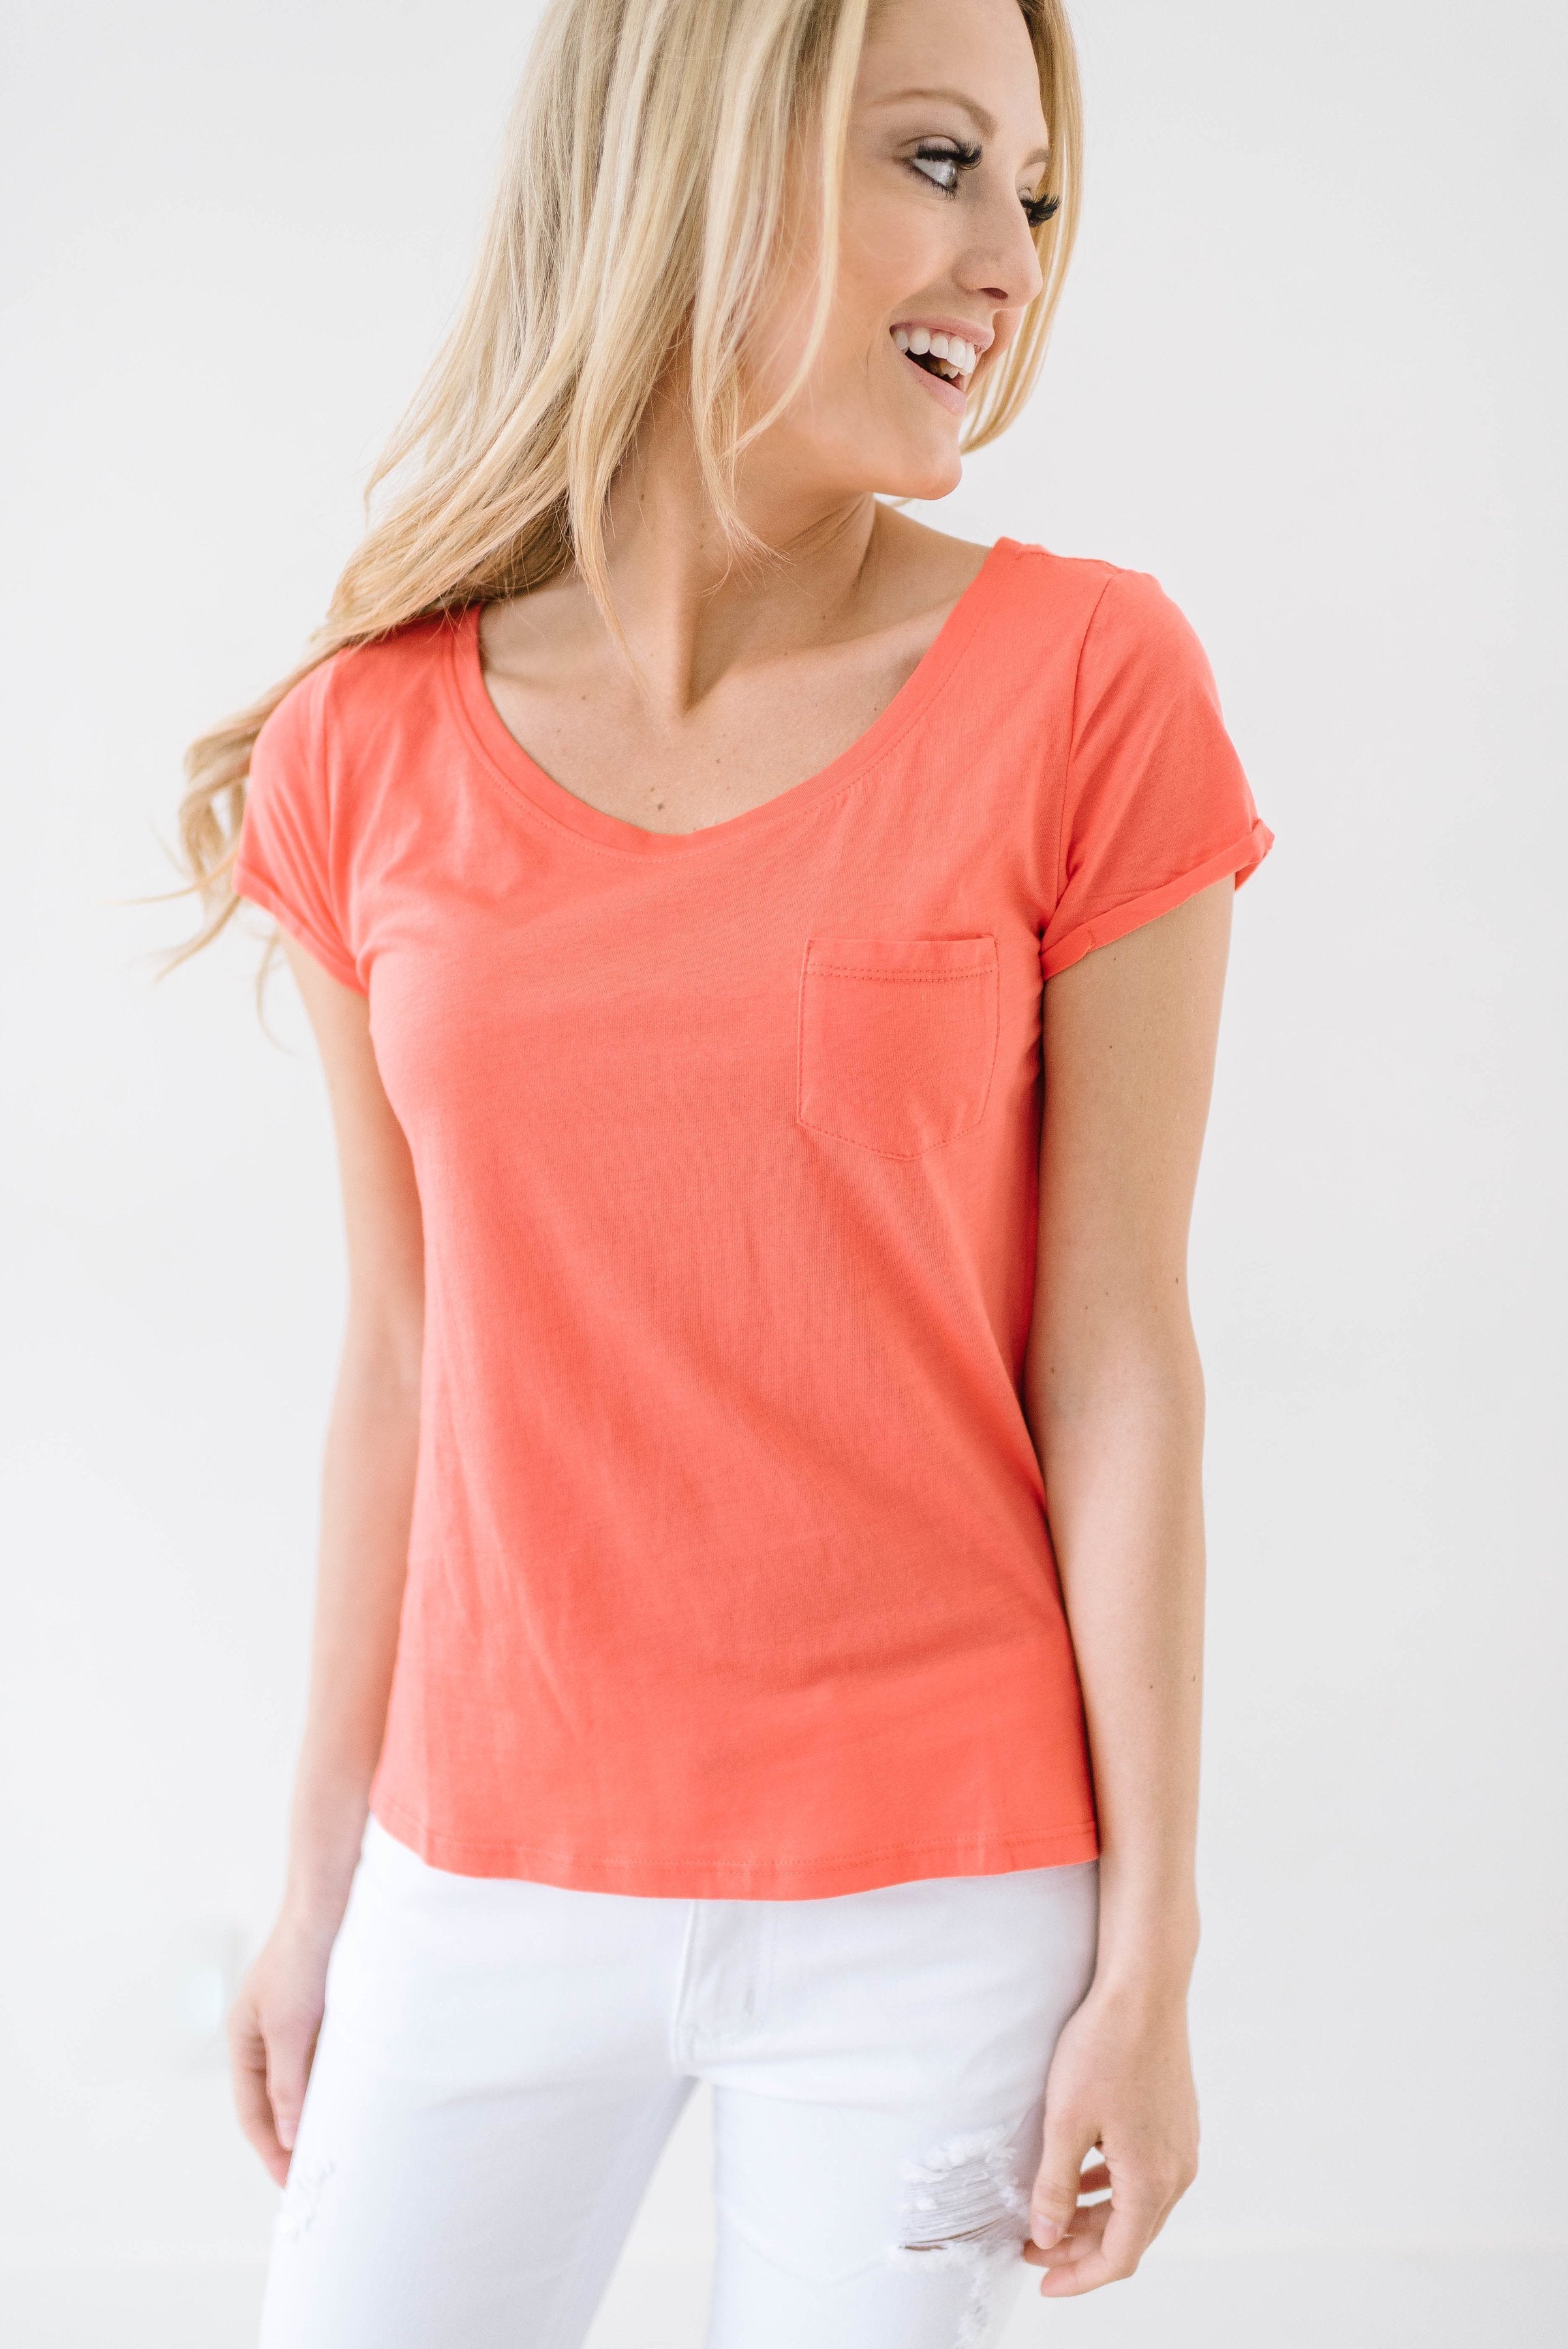 Cassie Coral Tee